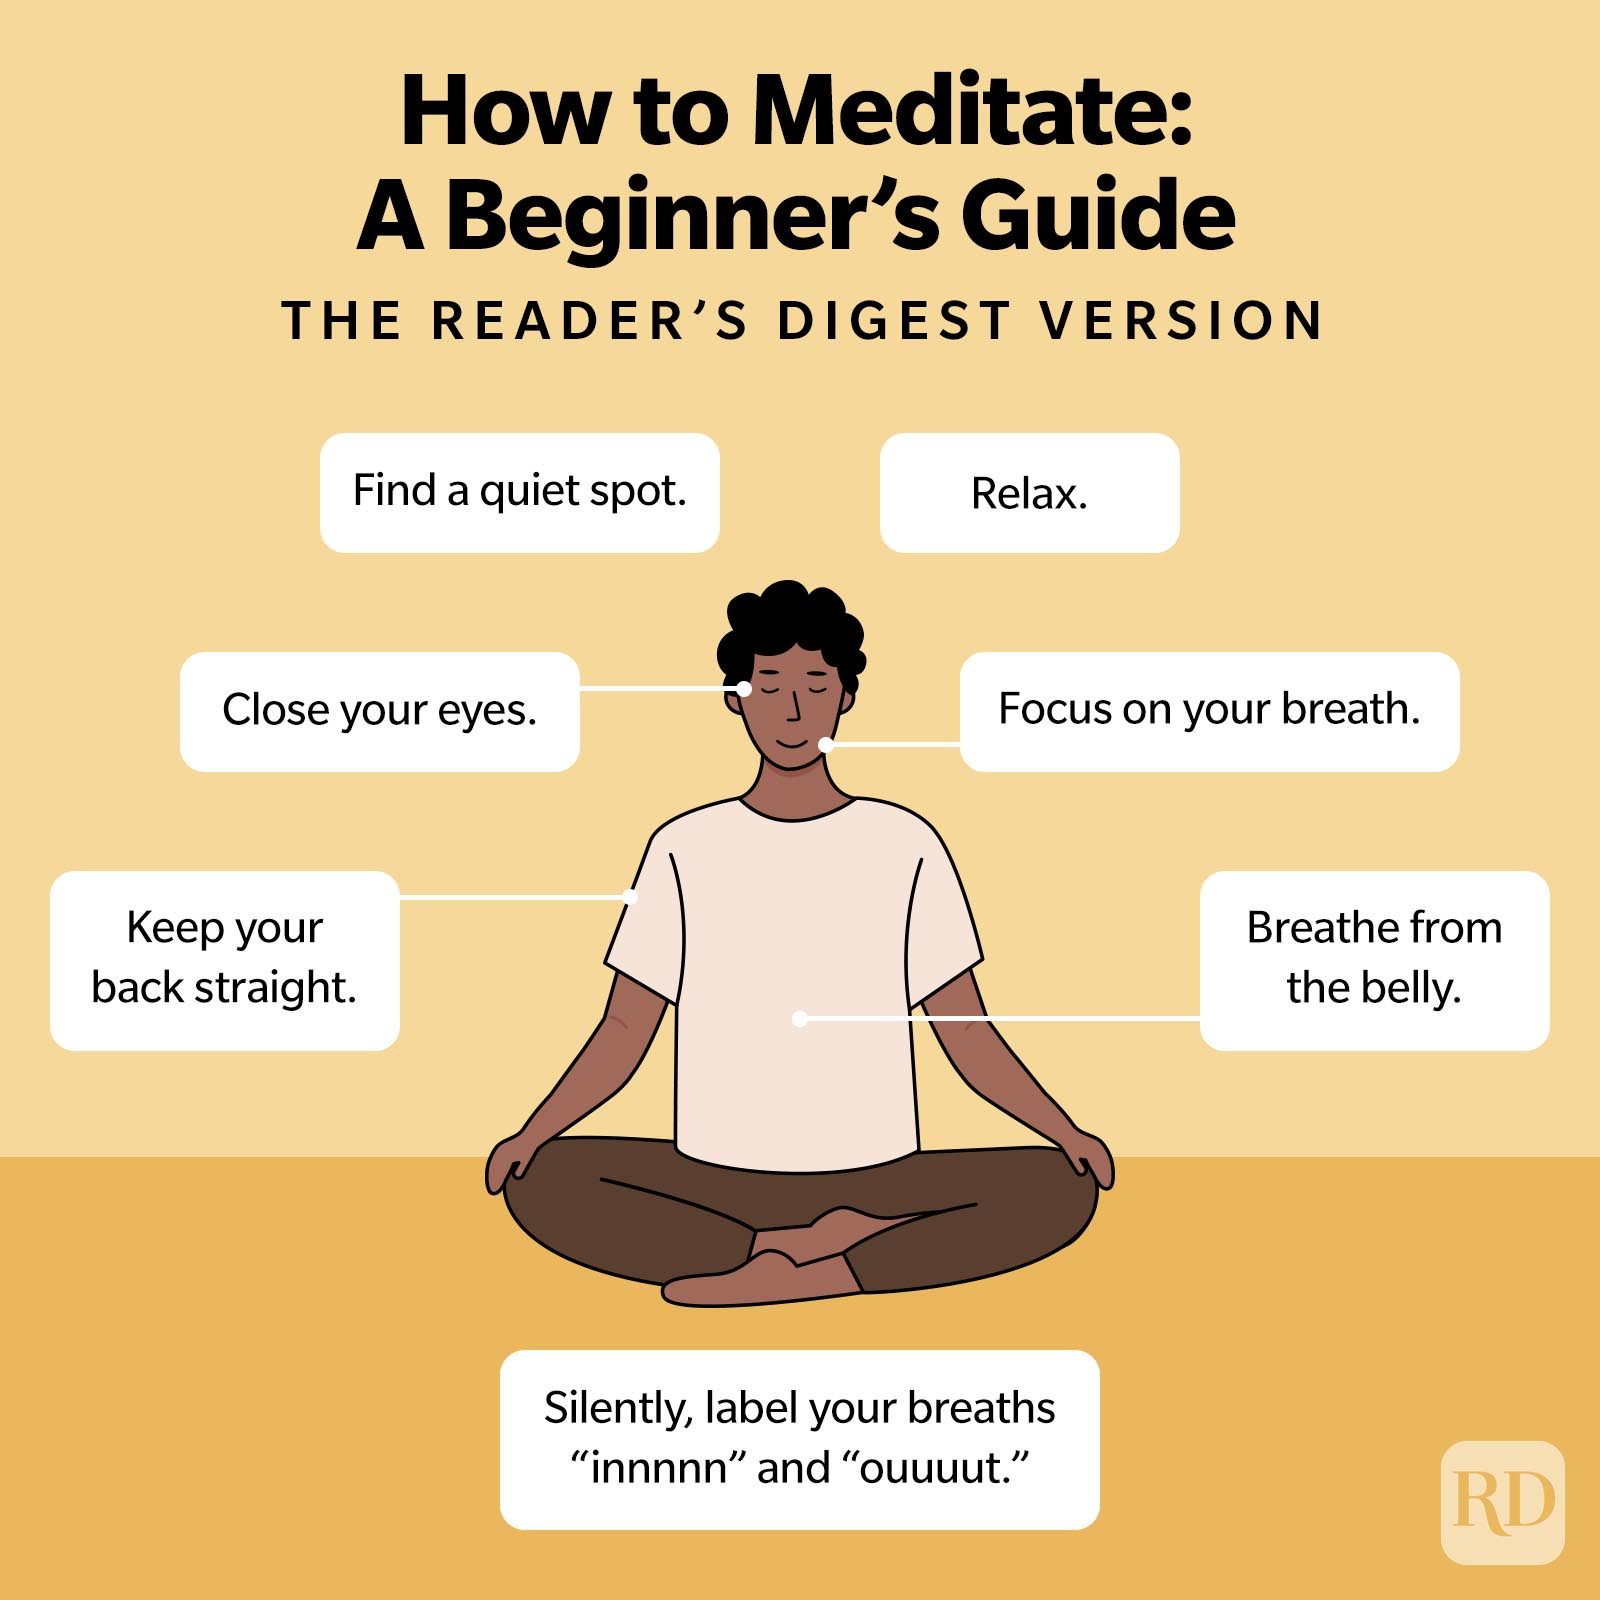 How to Meditate Properly: A Guide for Beginners